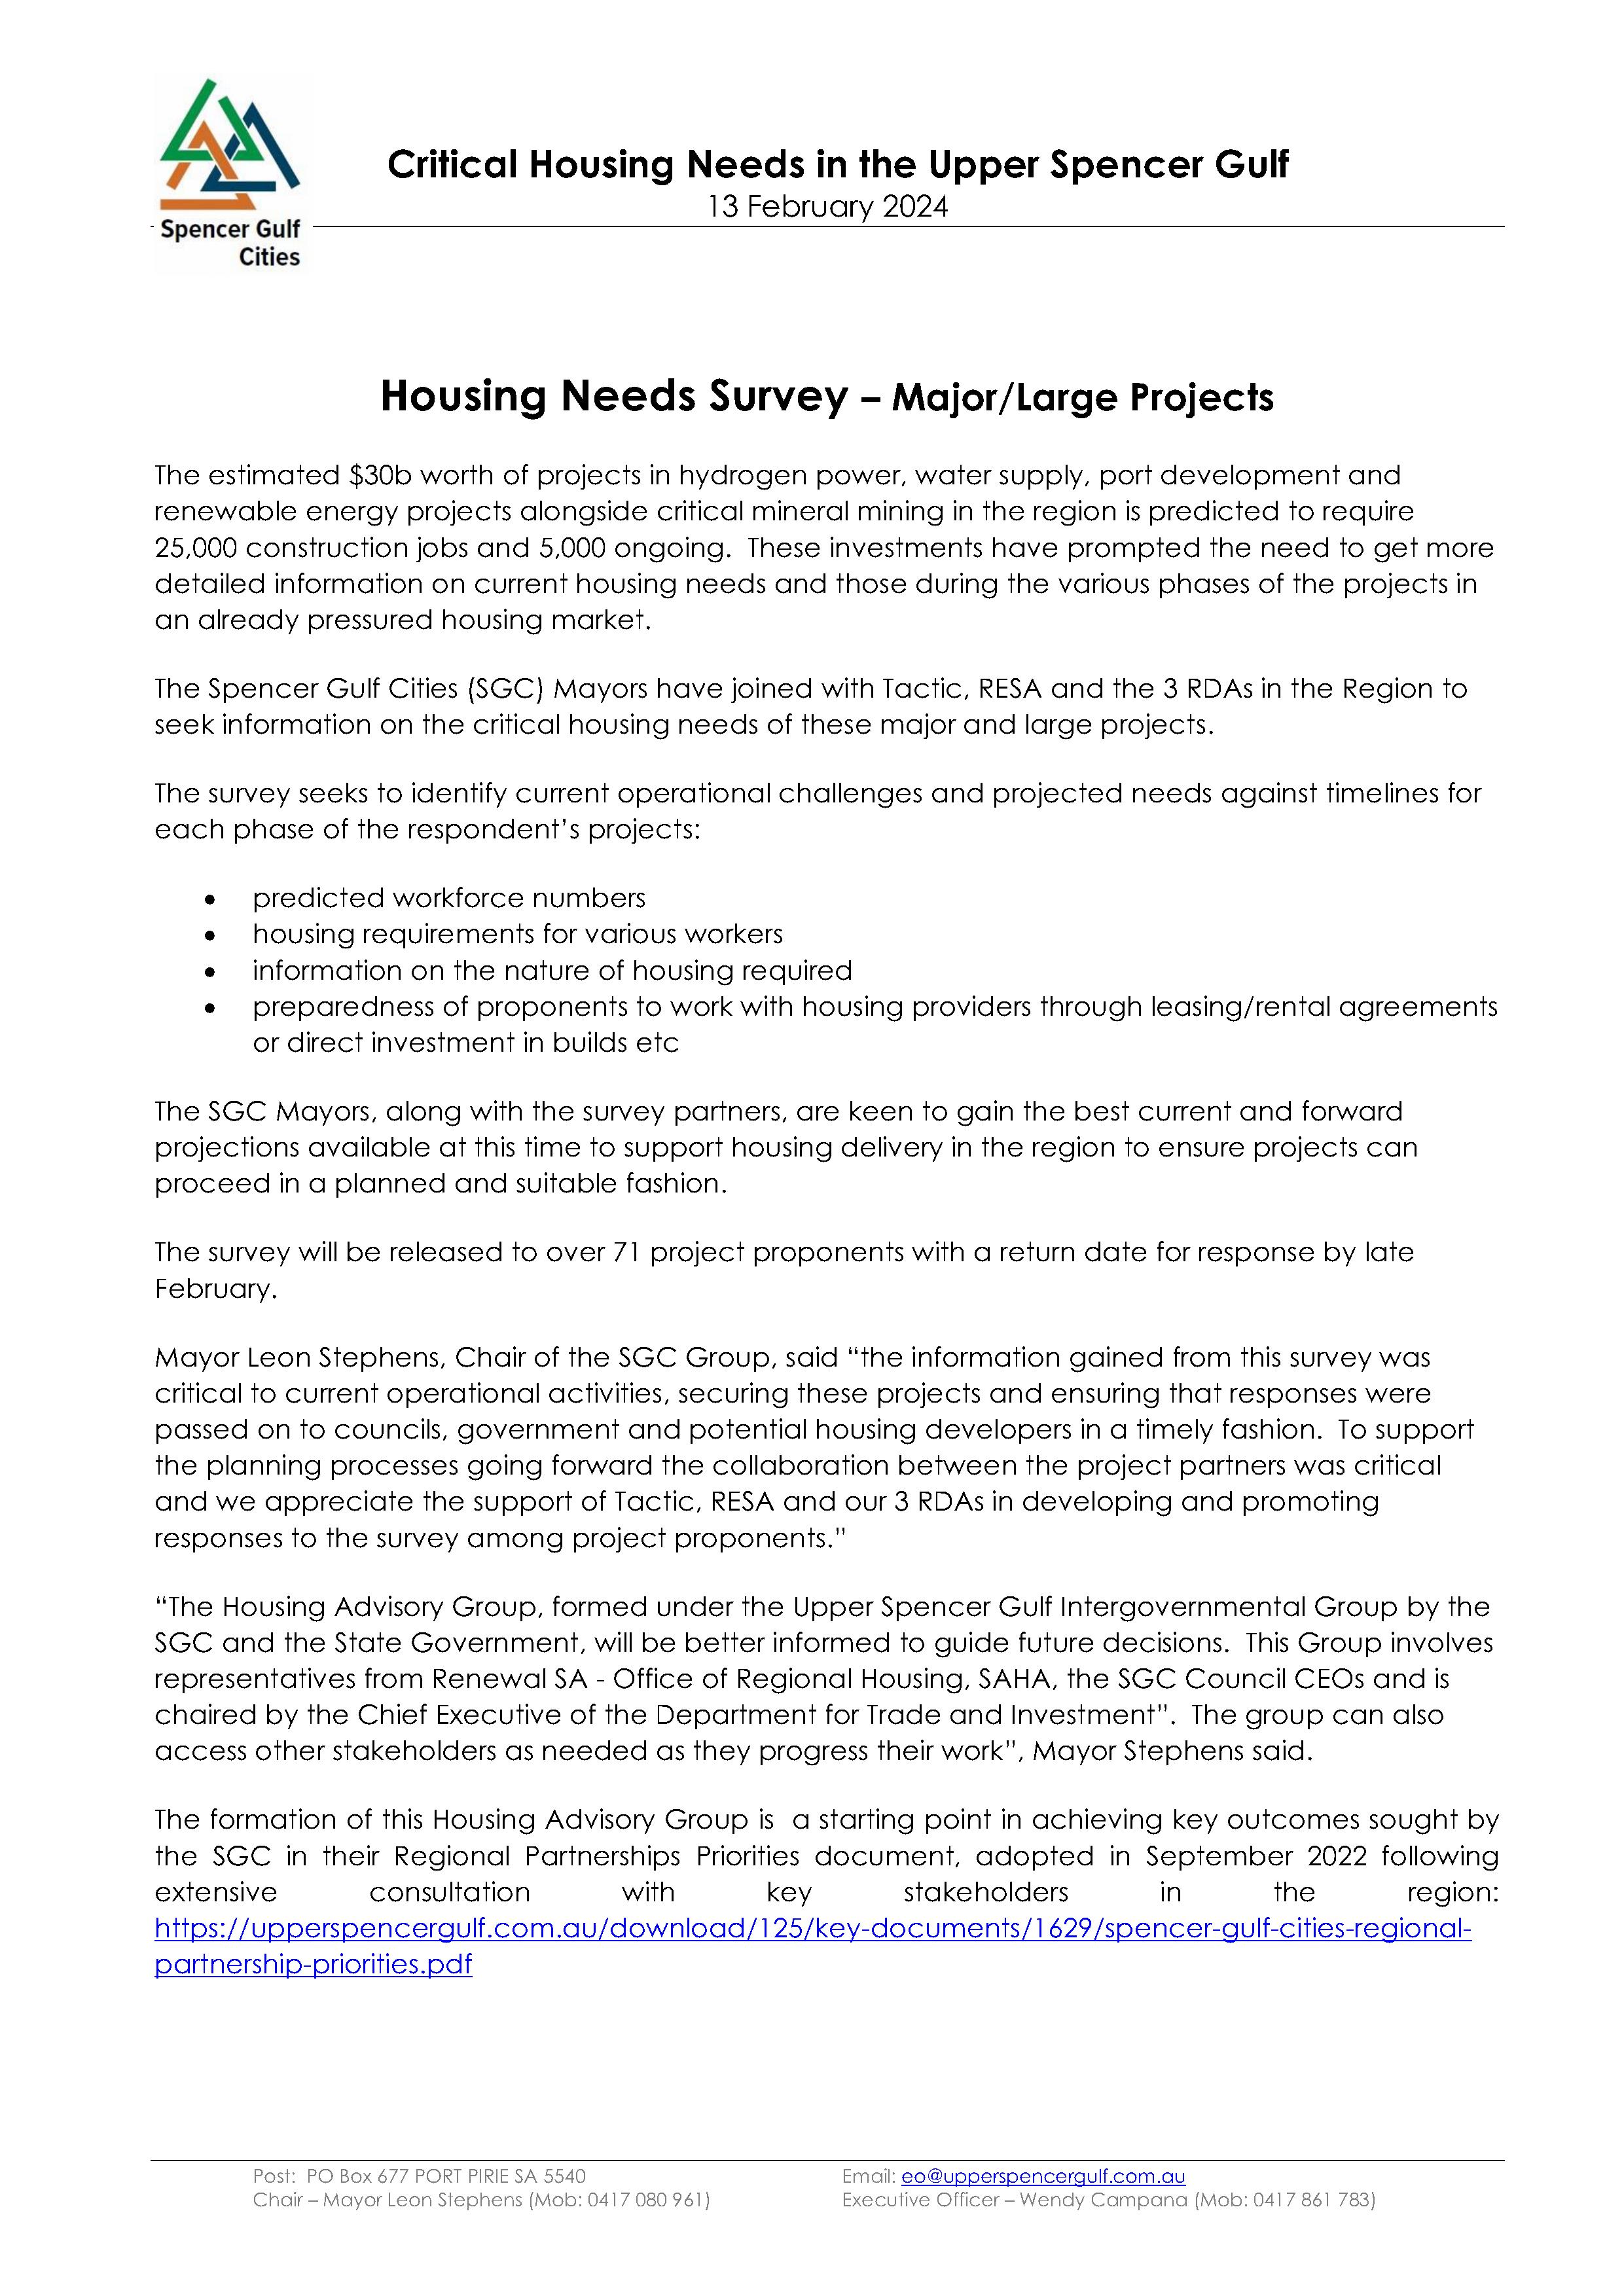 Page 1 of Media Release from Spencer Gulf Cities re Housing